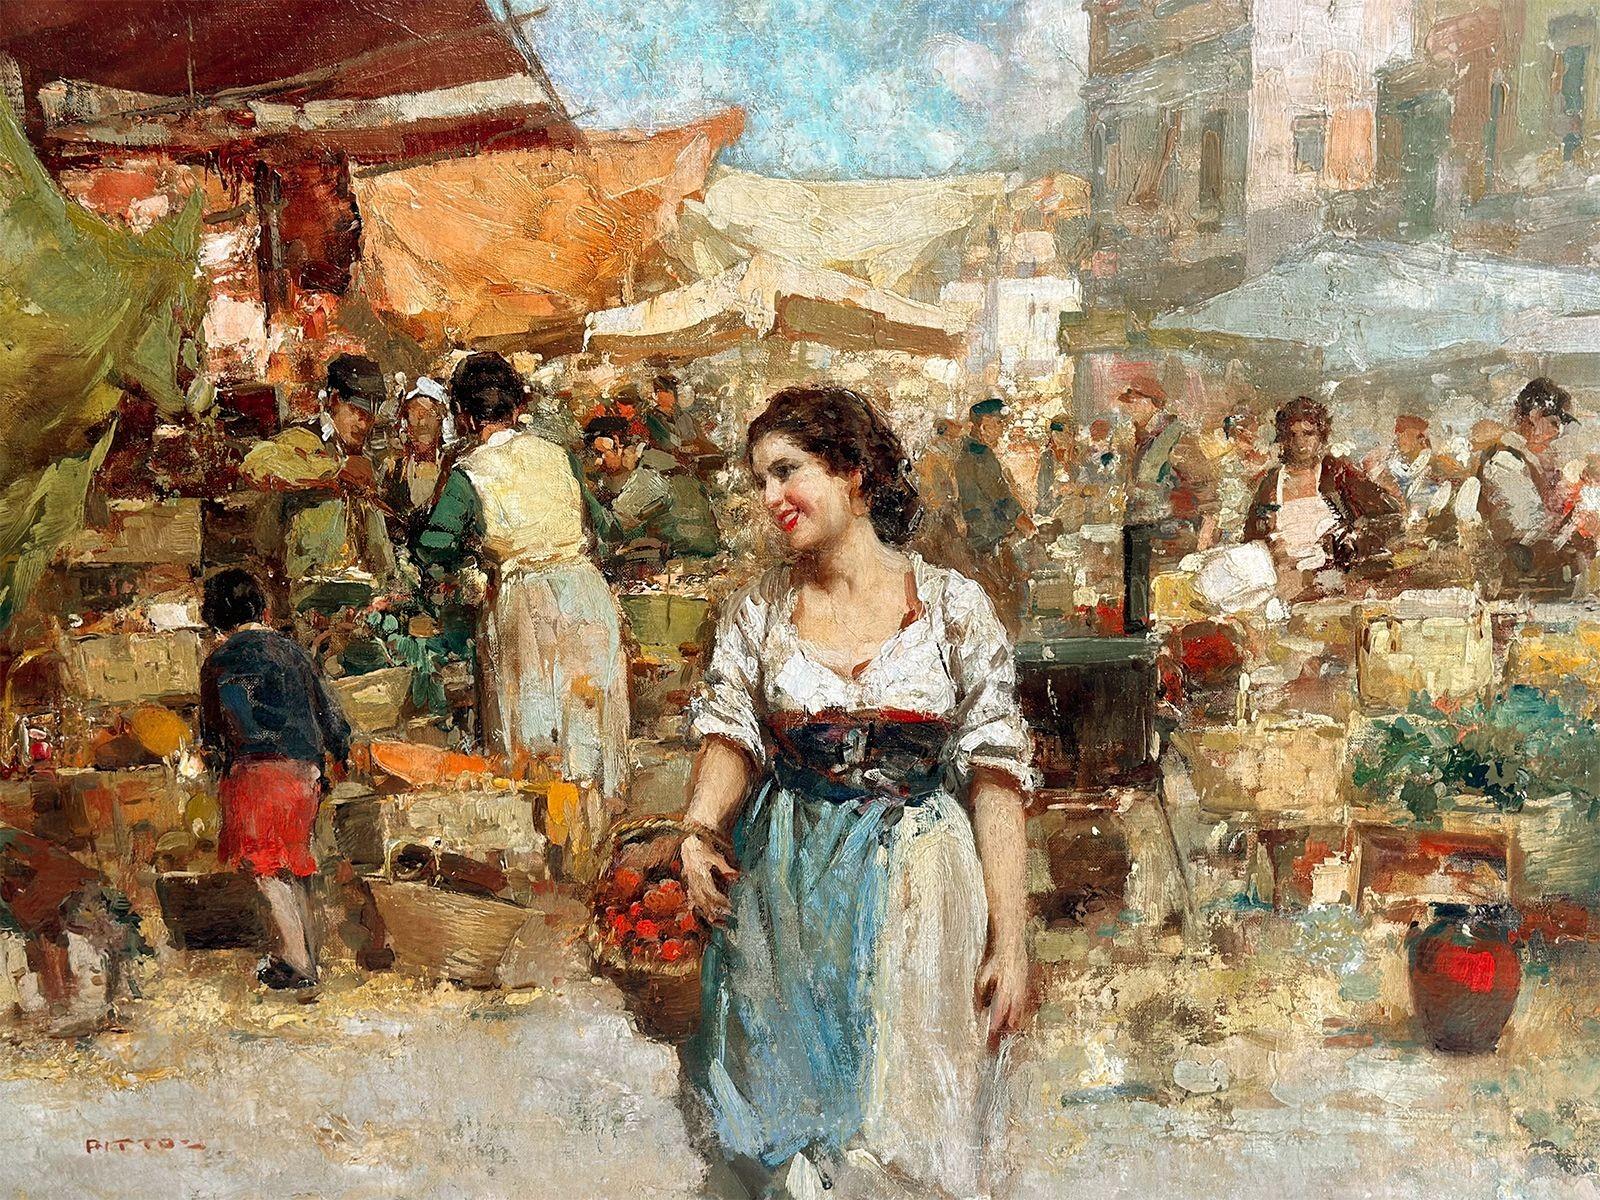 Traditional oil on canvas by Giuseppe Pitto depicting a beautiful young woman in a street market; she stands out from the scene since the background, the buildings, villagers, and stands have all been painted with small brushstrokes, unblended